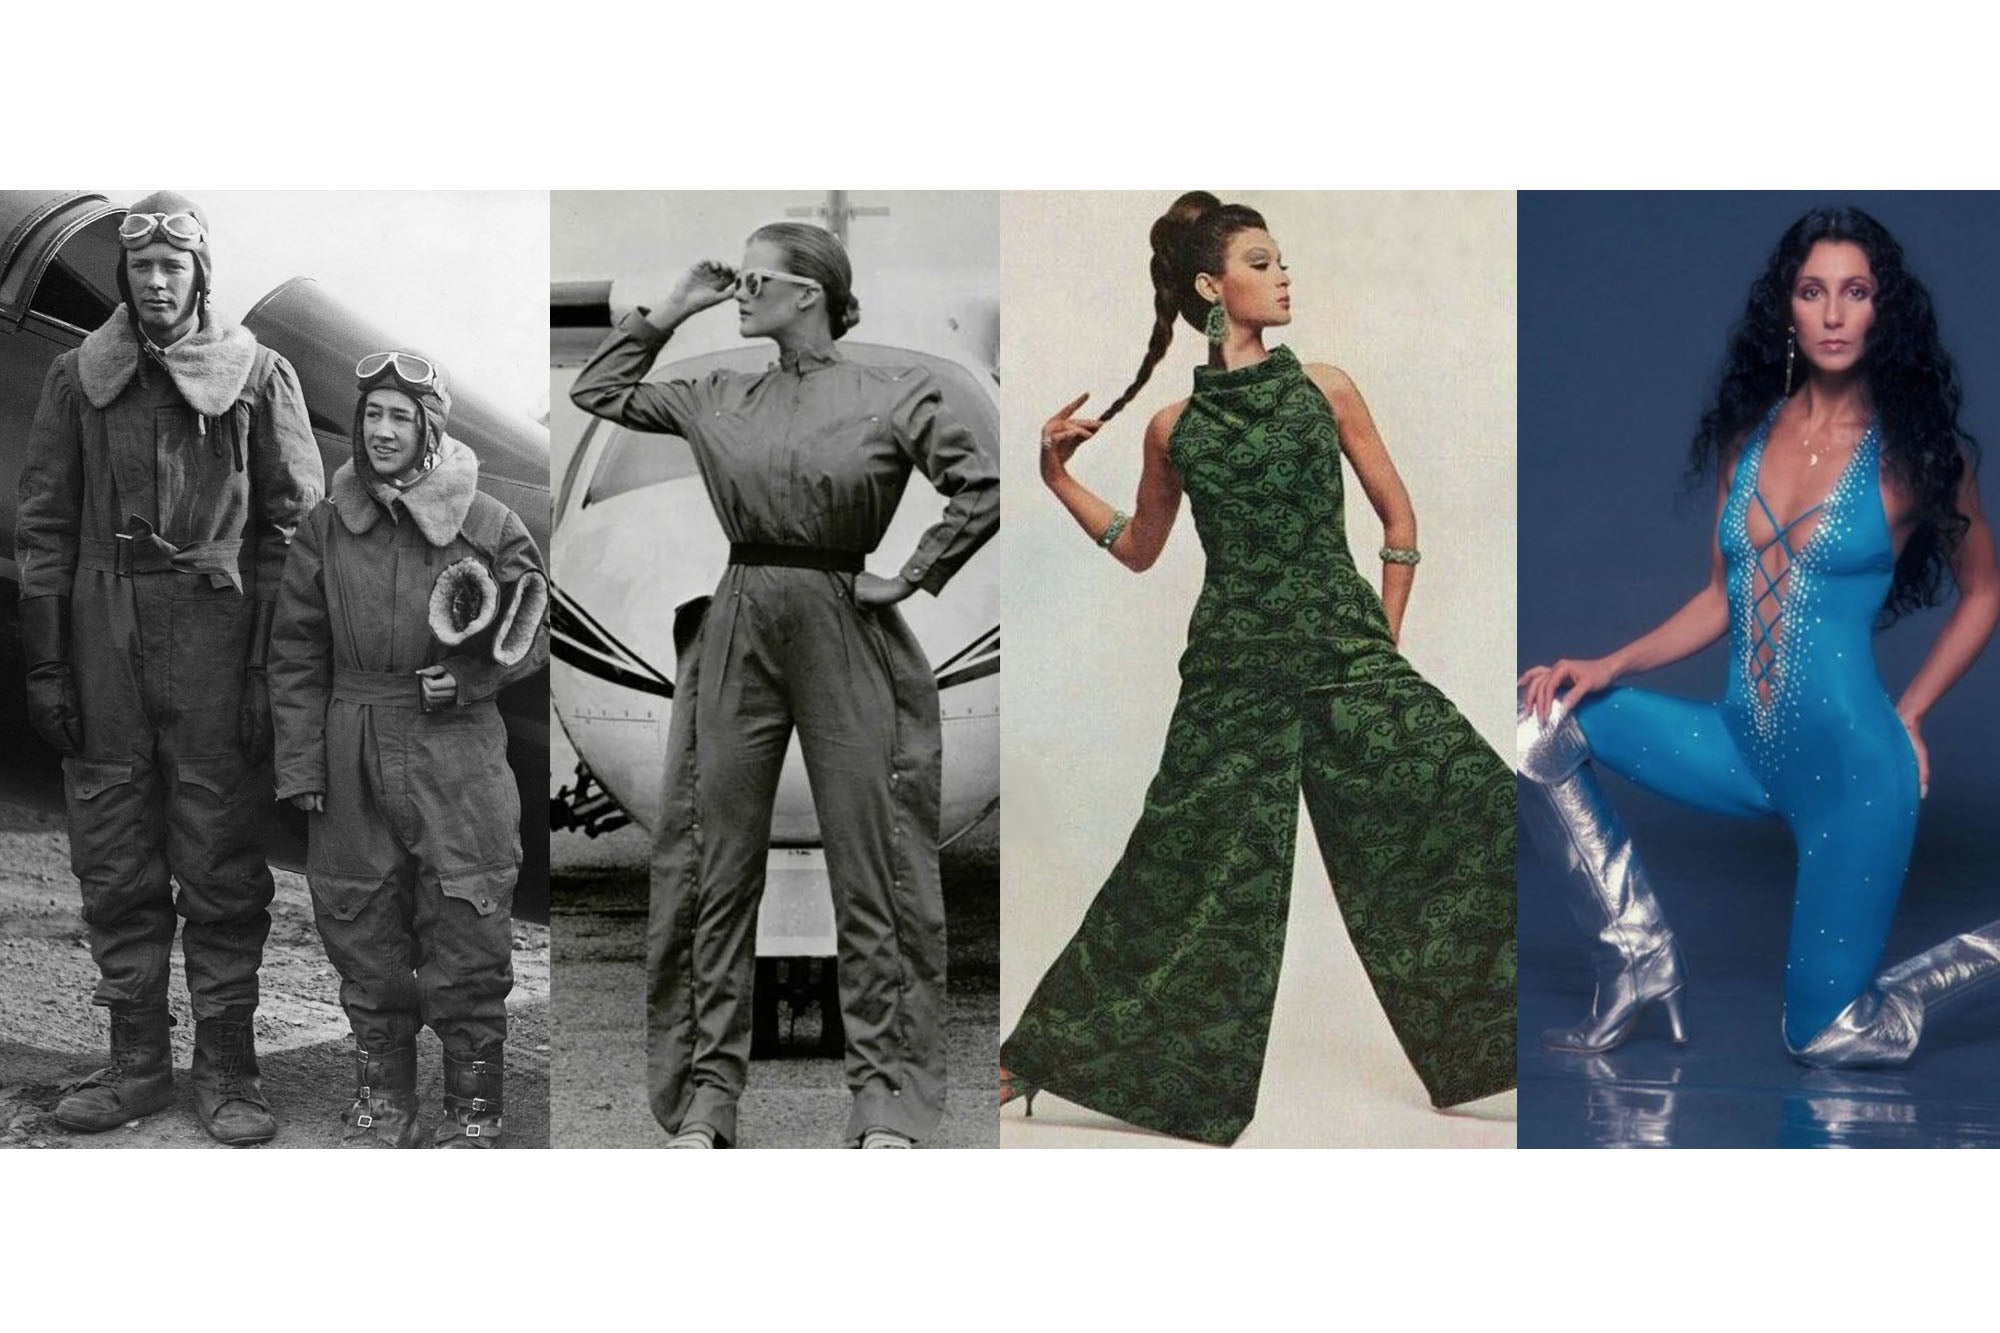 HISTORY OF A JUMPSUIT